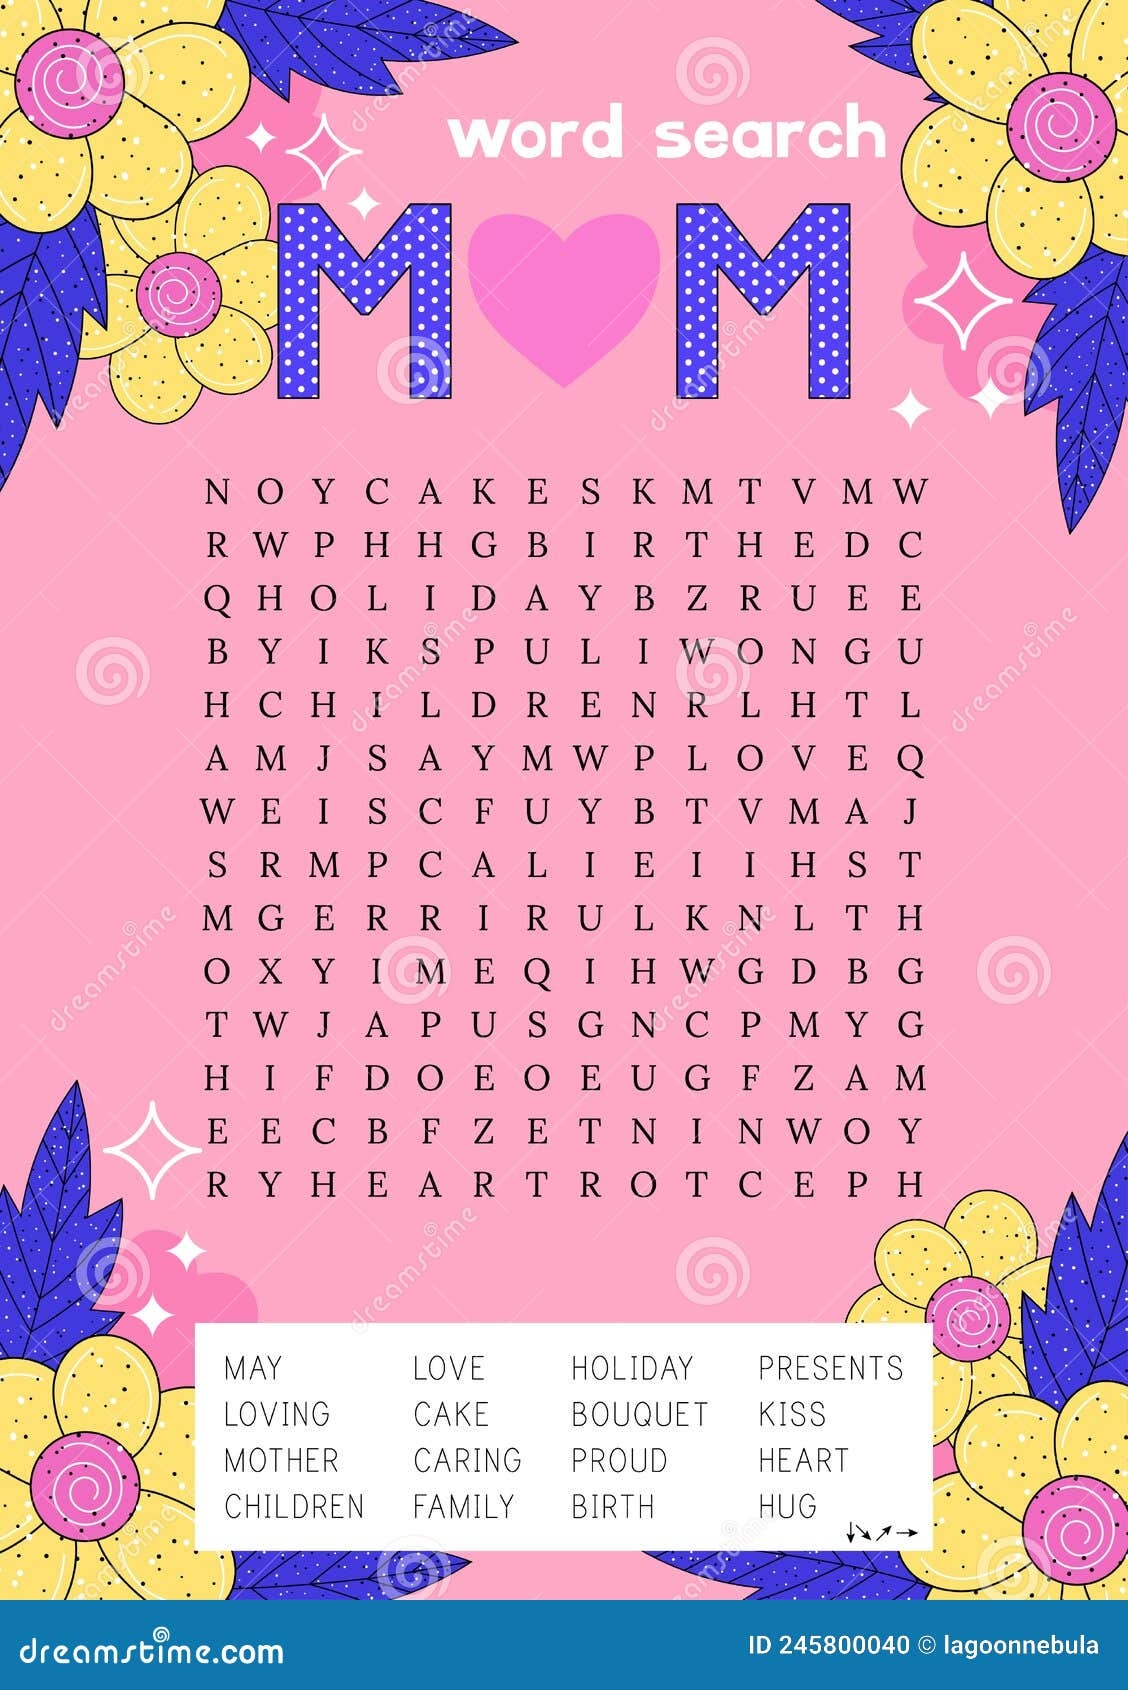 Mother s Day Word Search Puzzle Festive Crossword Suitable For Social Media Post Stock Vector Illustration Of March Crossword 245800040